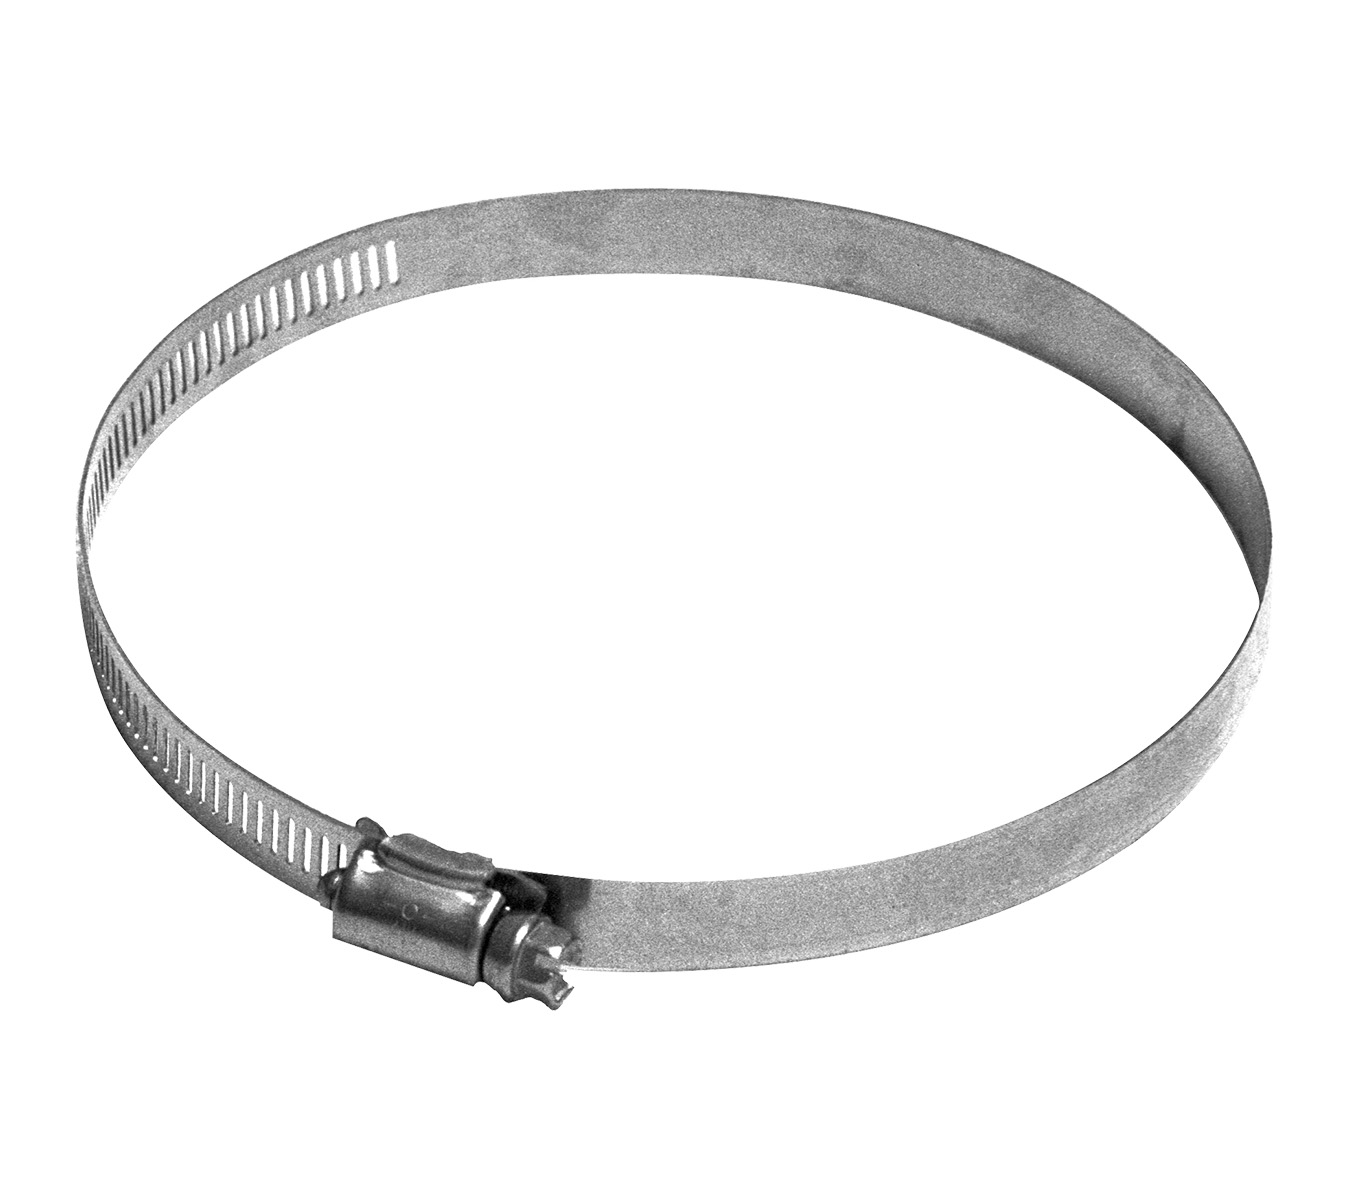 Hose Clamp 24 inch, 304 Stainless Steel - Airpro, Inc.